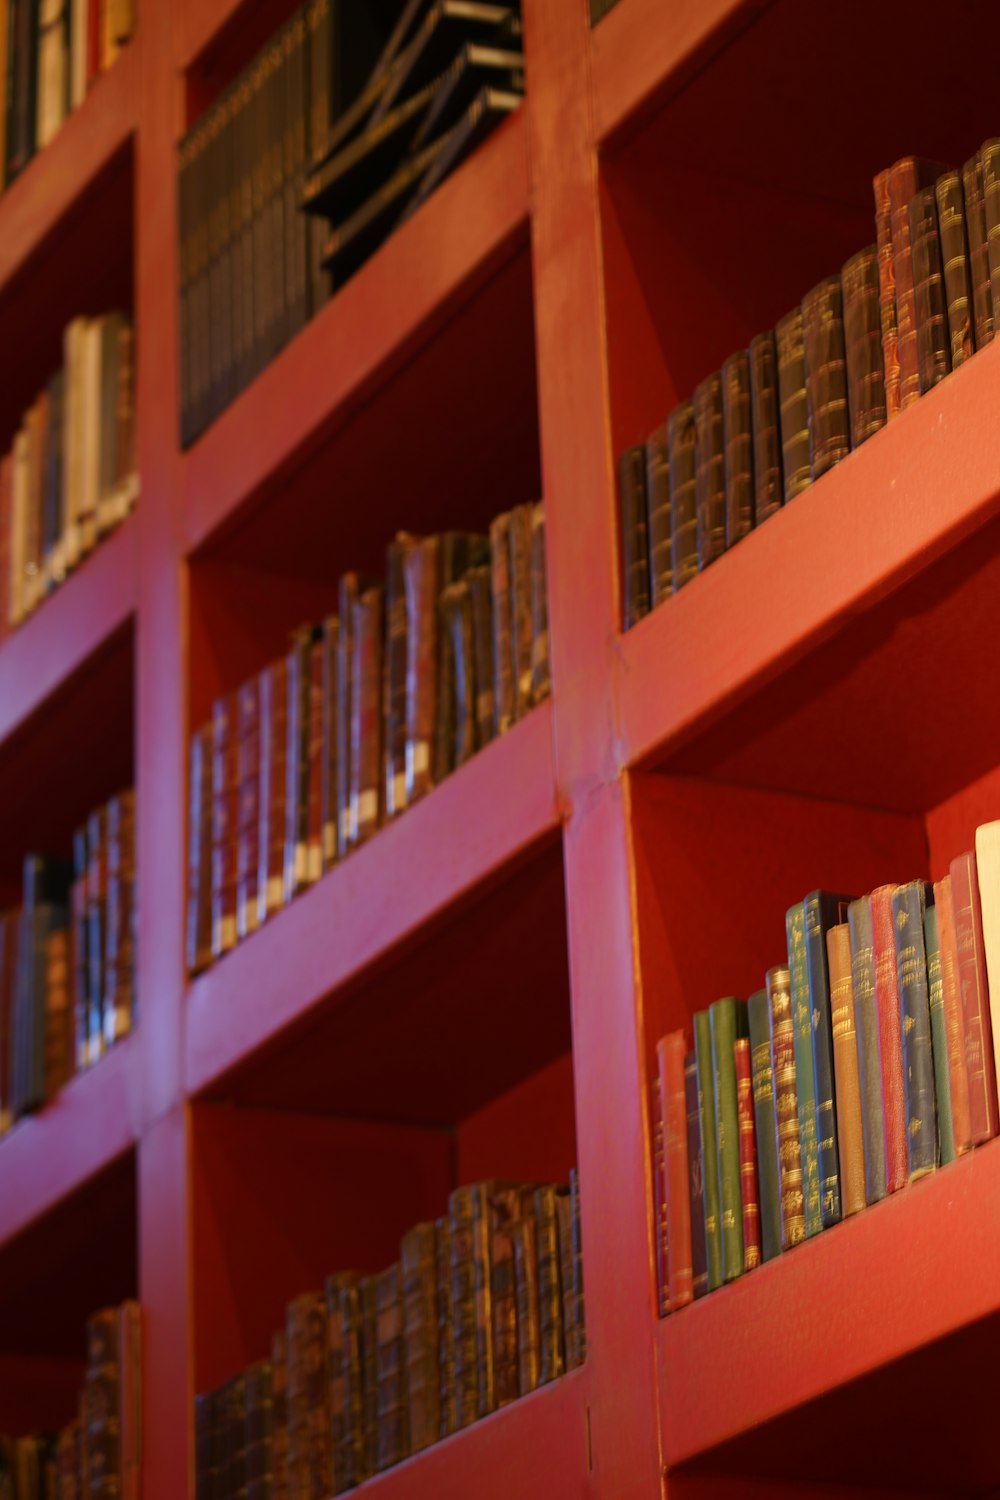 a red book shelf filled with lots of books